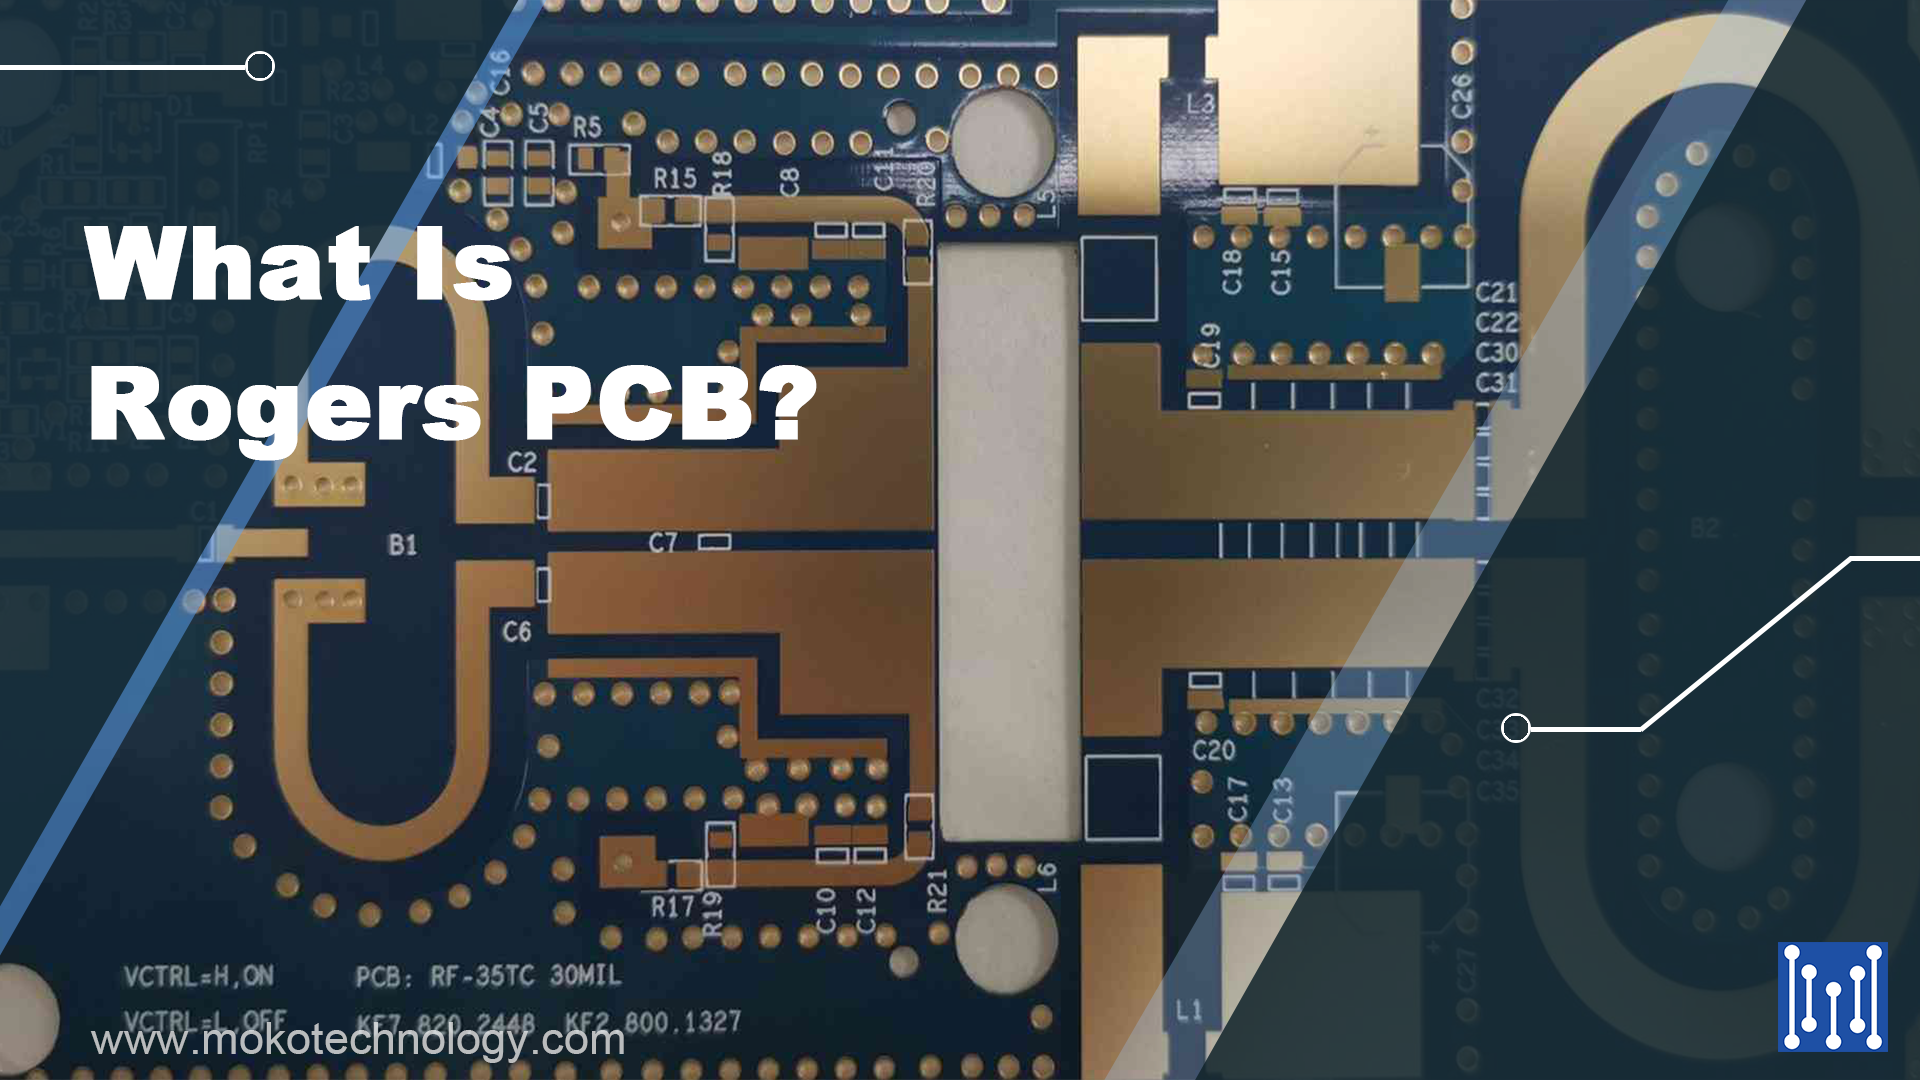 What Is Rogers PCB